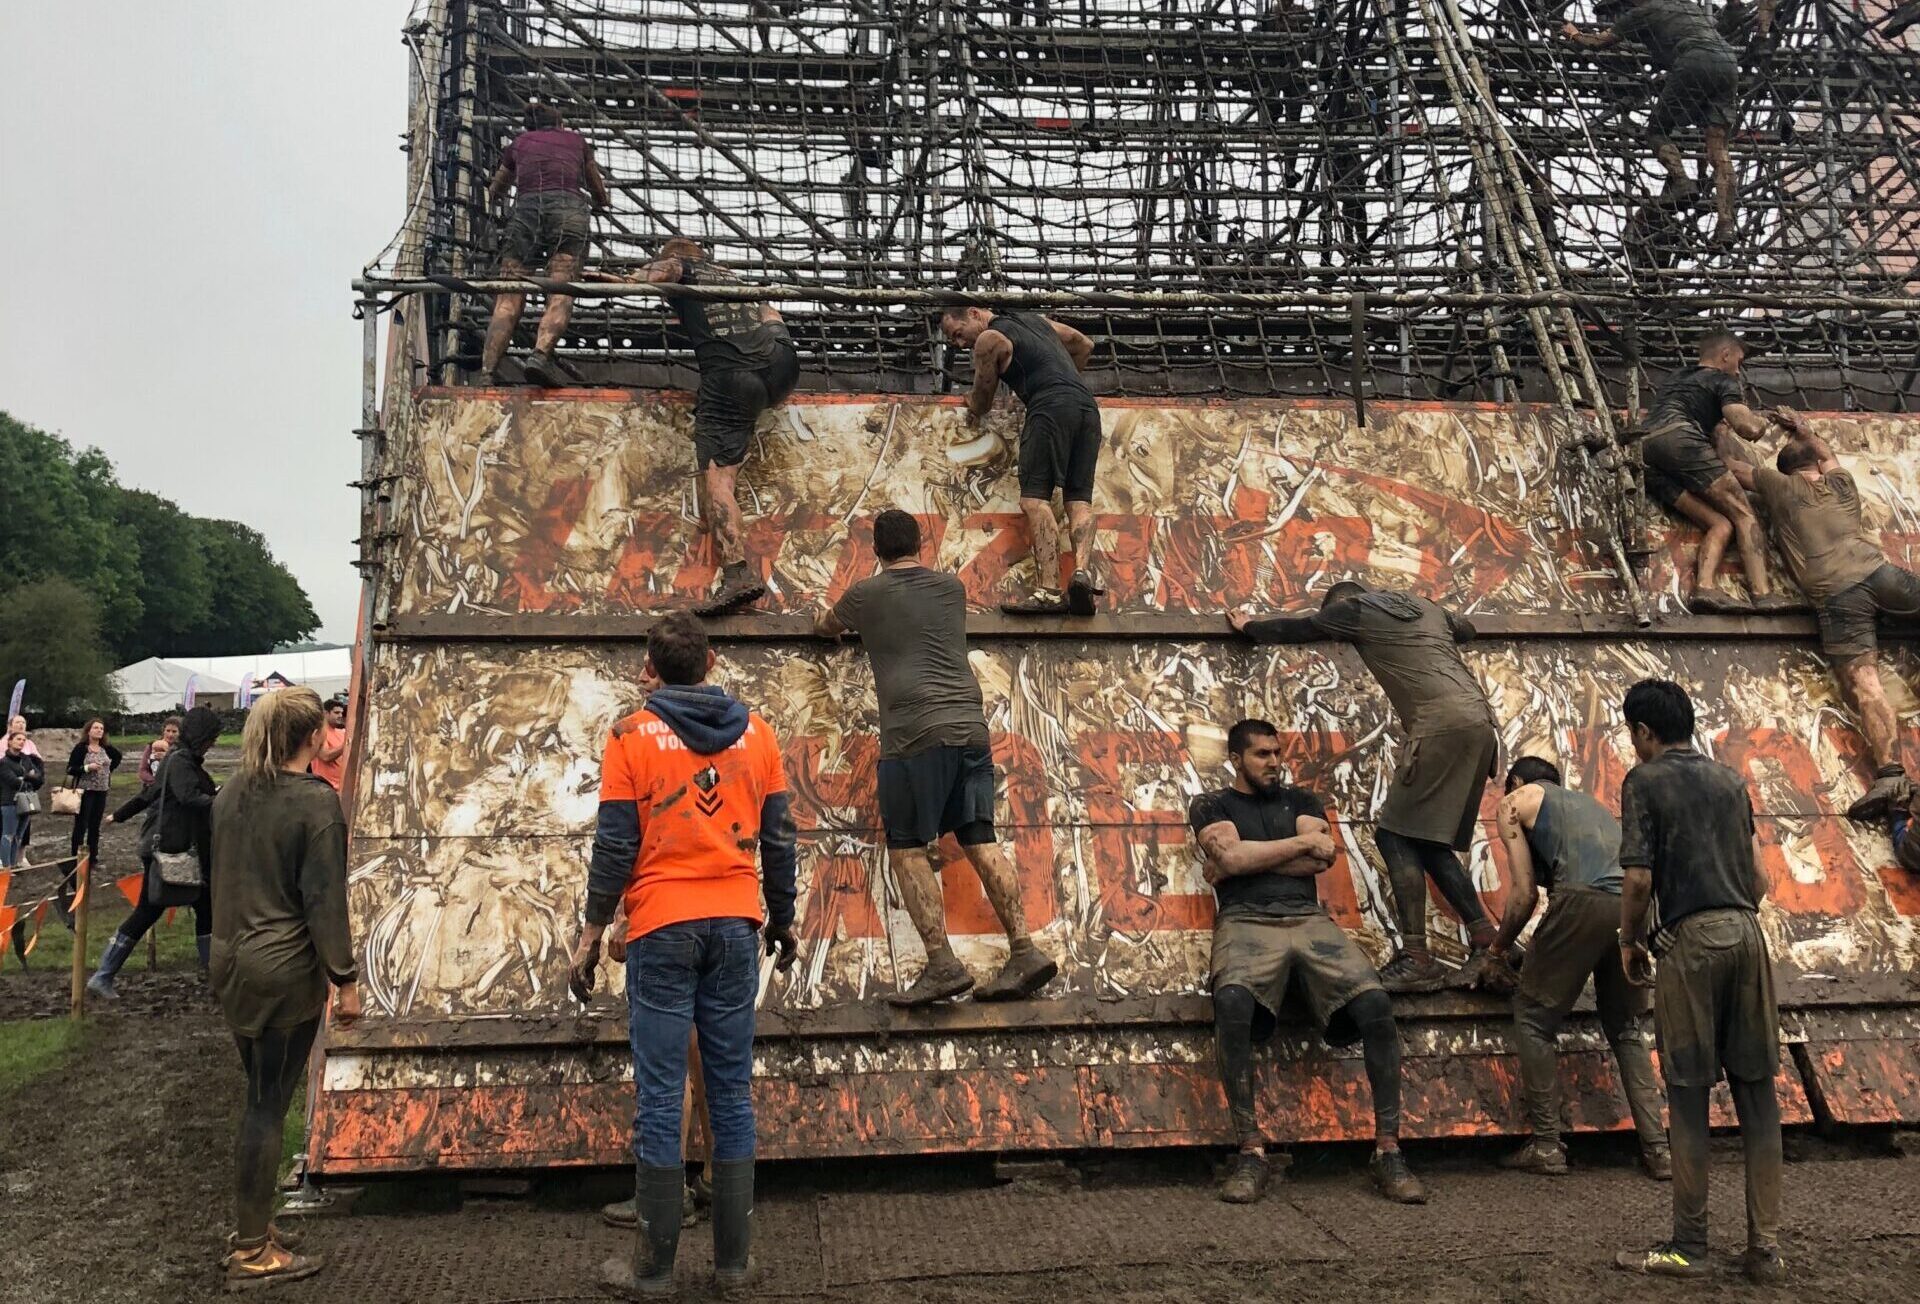 People taking part in a tough mudder climb